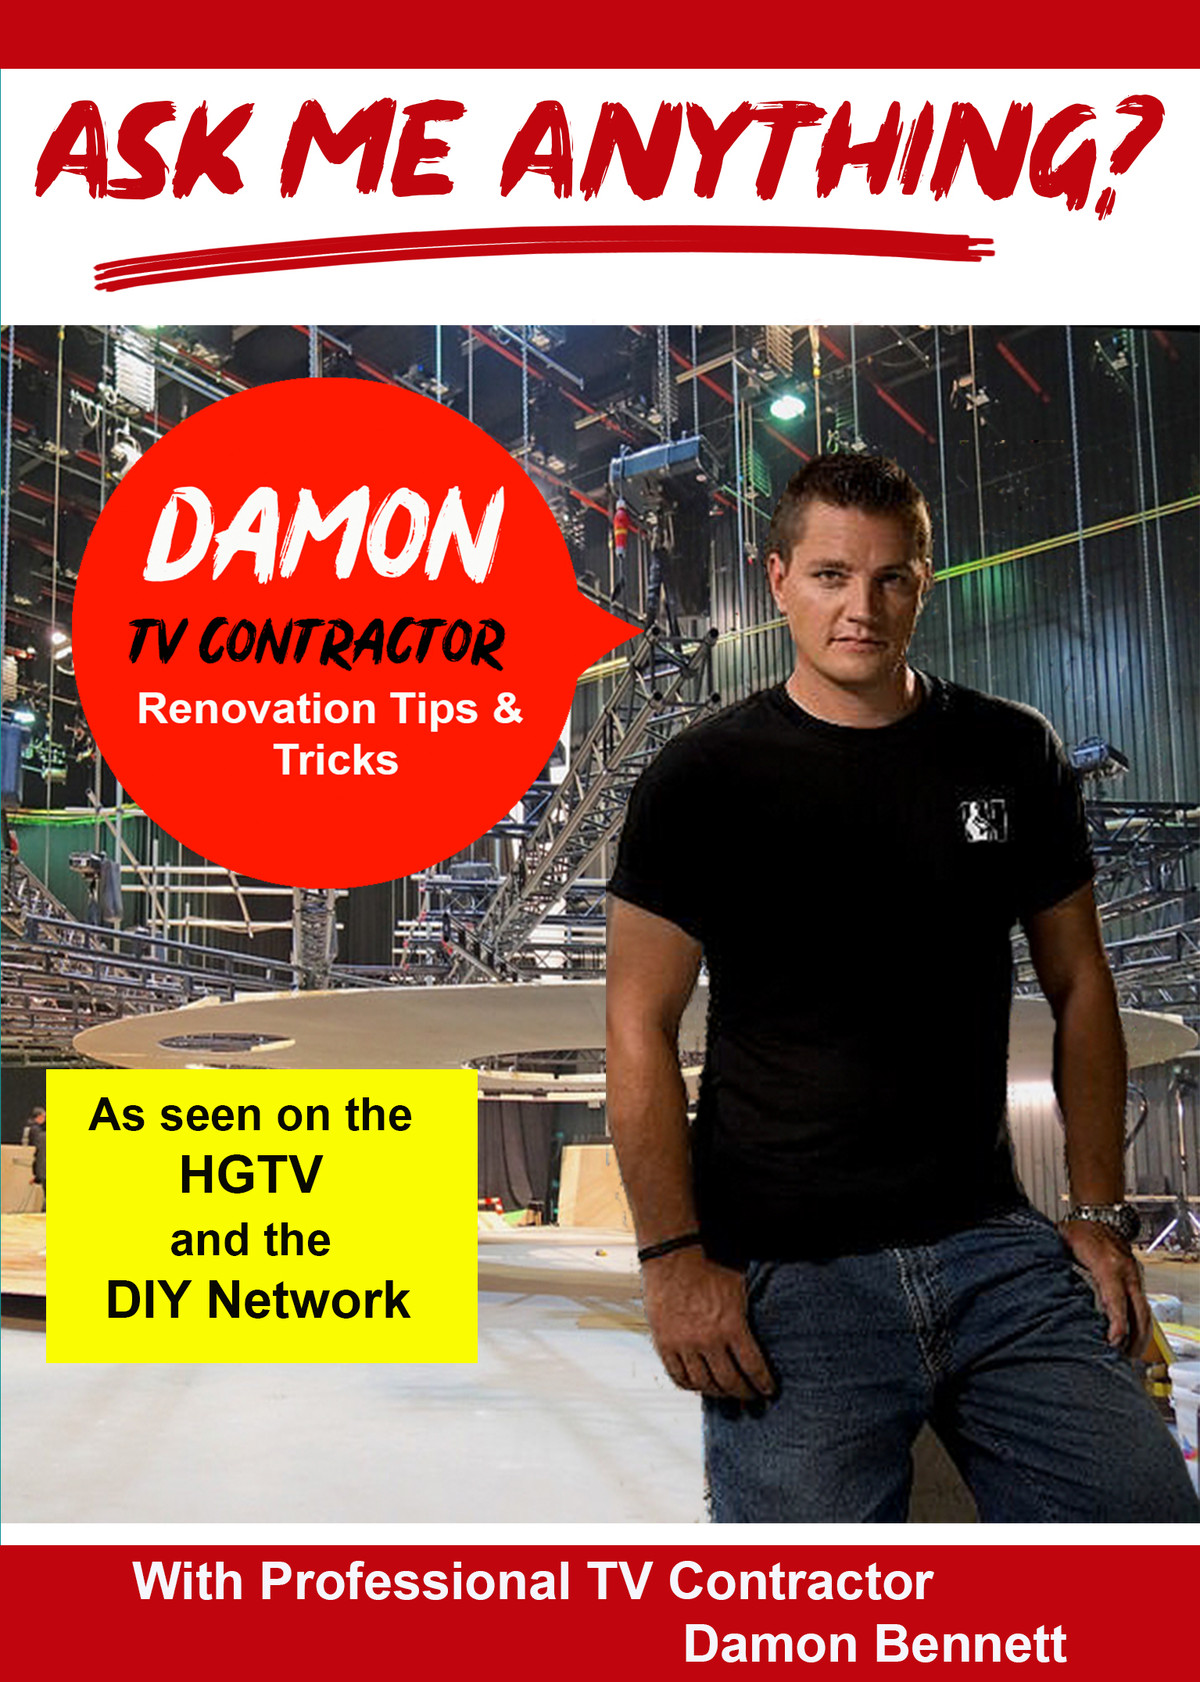 K4830 - Ask Me Anything about being a TV Contractor, Renovation Tips & Tricks with With Professional TV Contractor & Host Damon Bennett